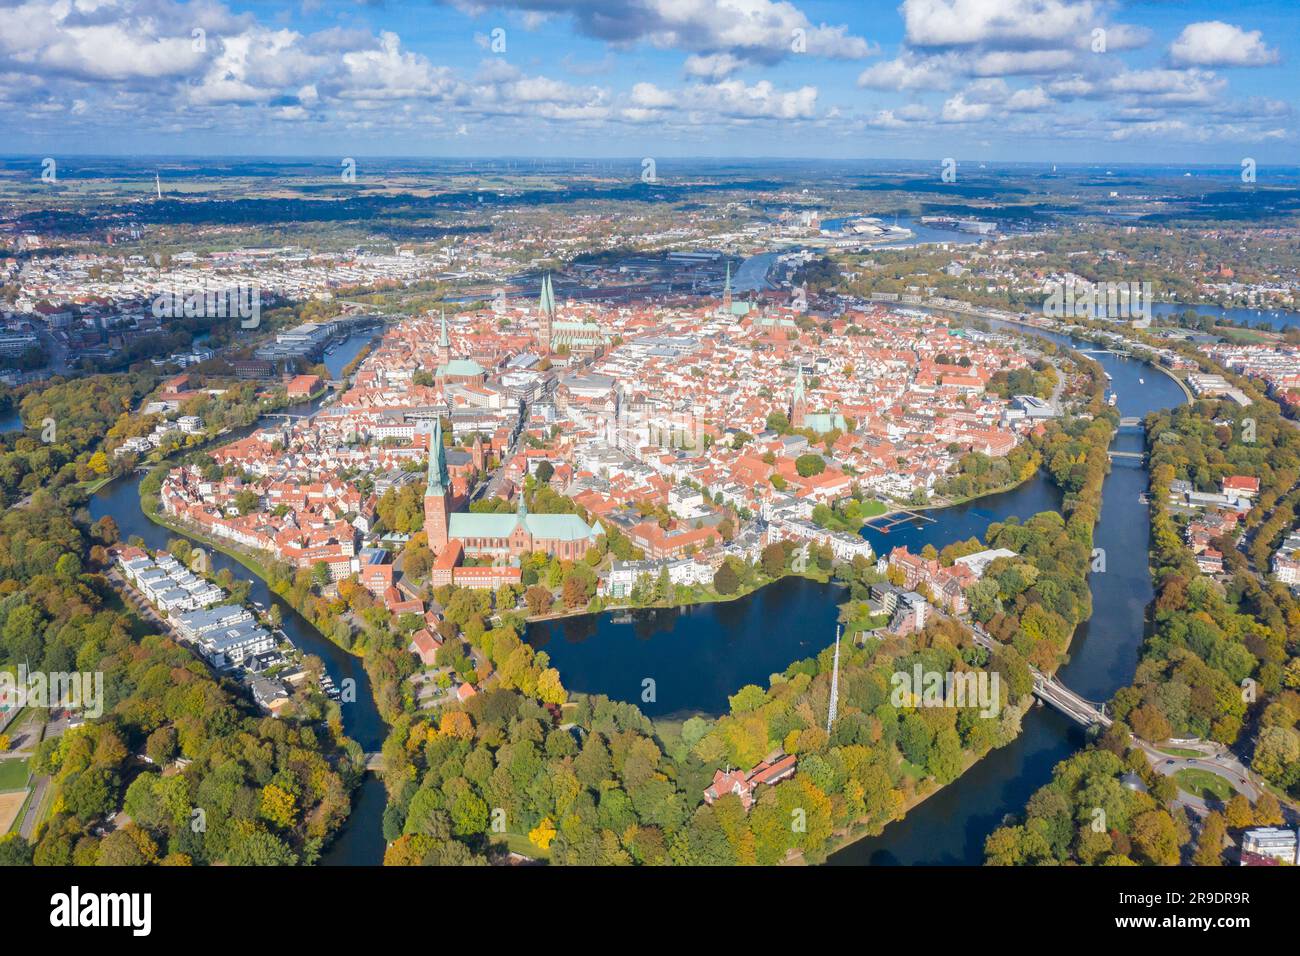 City of Luebeck surrounded by the rivers Wakenitz and Trave, aerial view. Schleswig-Holstein, Germany Stock Photo